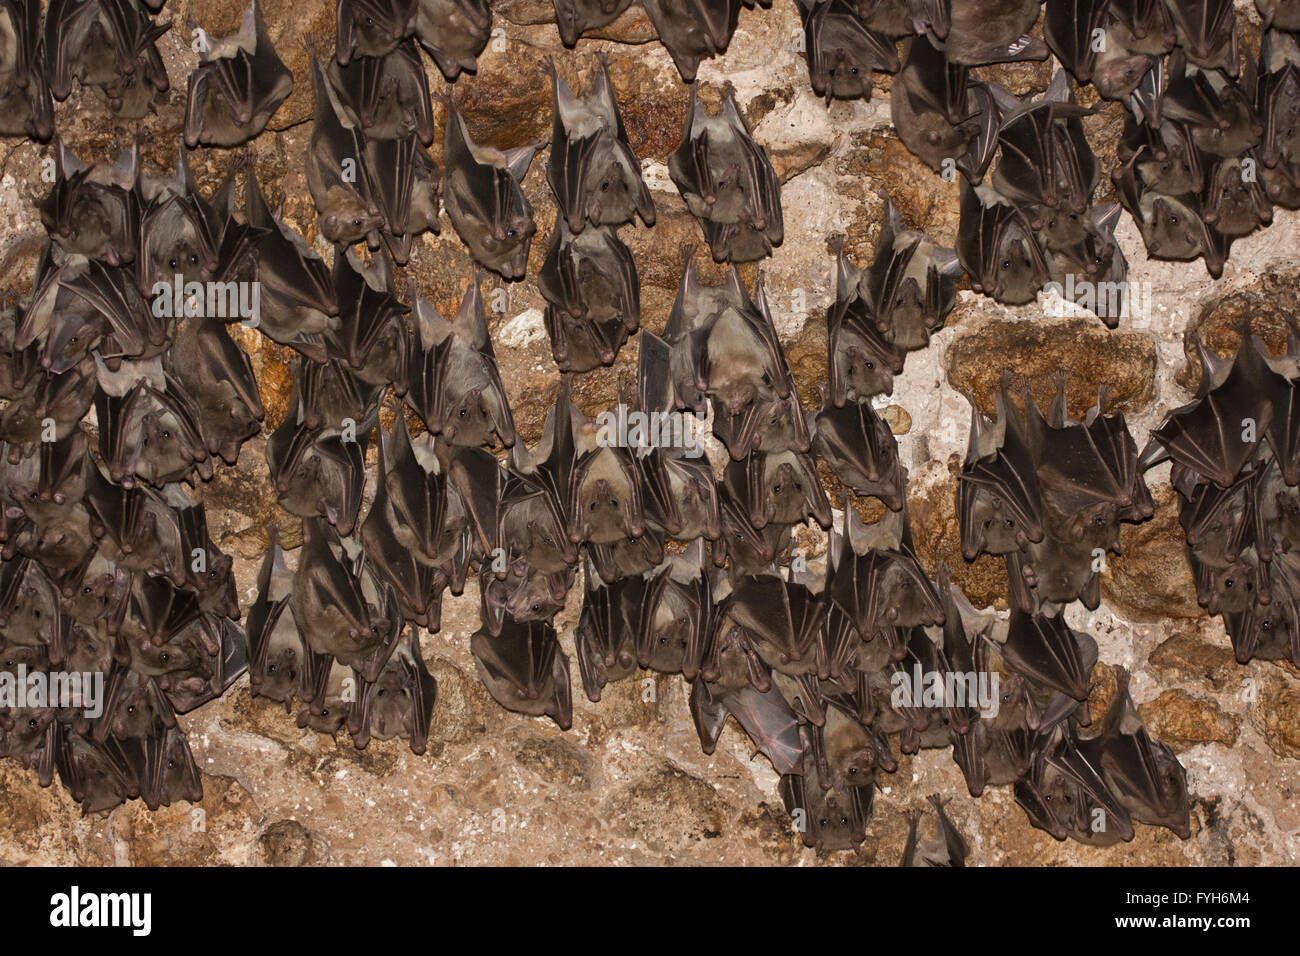 Egyptian Fruit Bat (Rousettus aegyptiacus) On a cave's wall. Photographed in the Judaean Hills, Israel Stock Photo